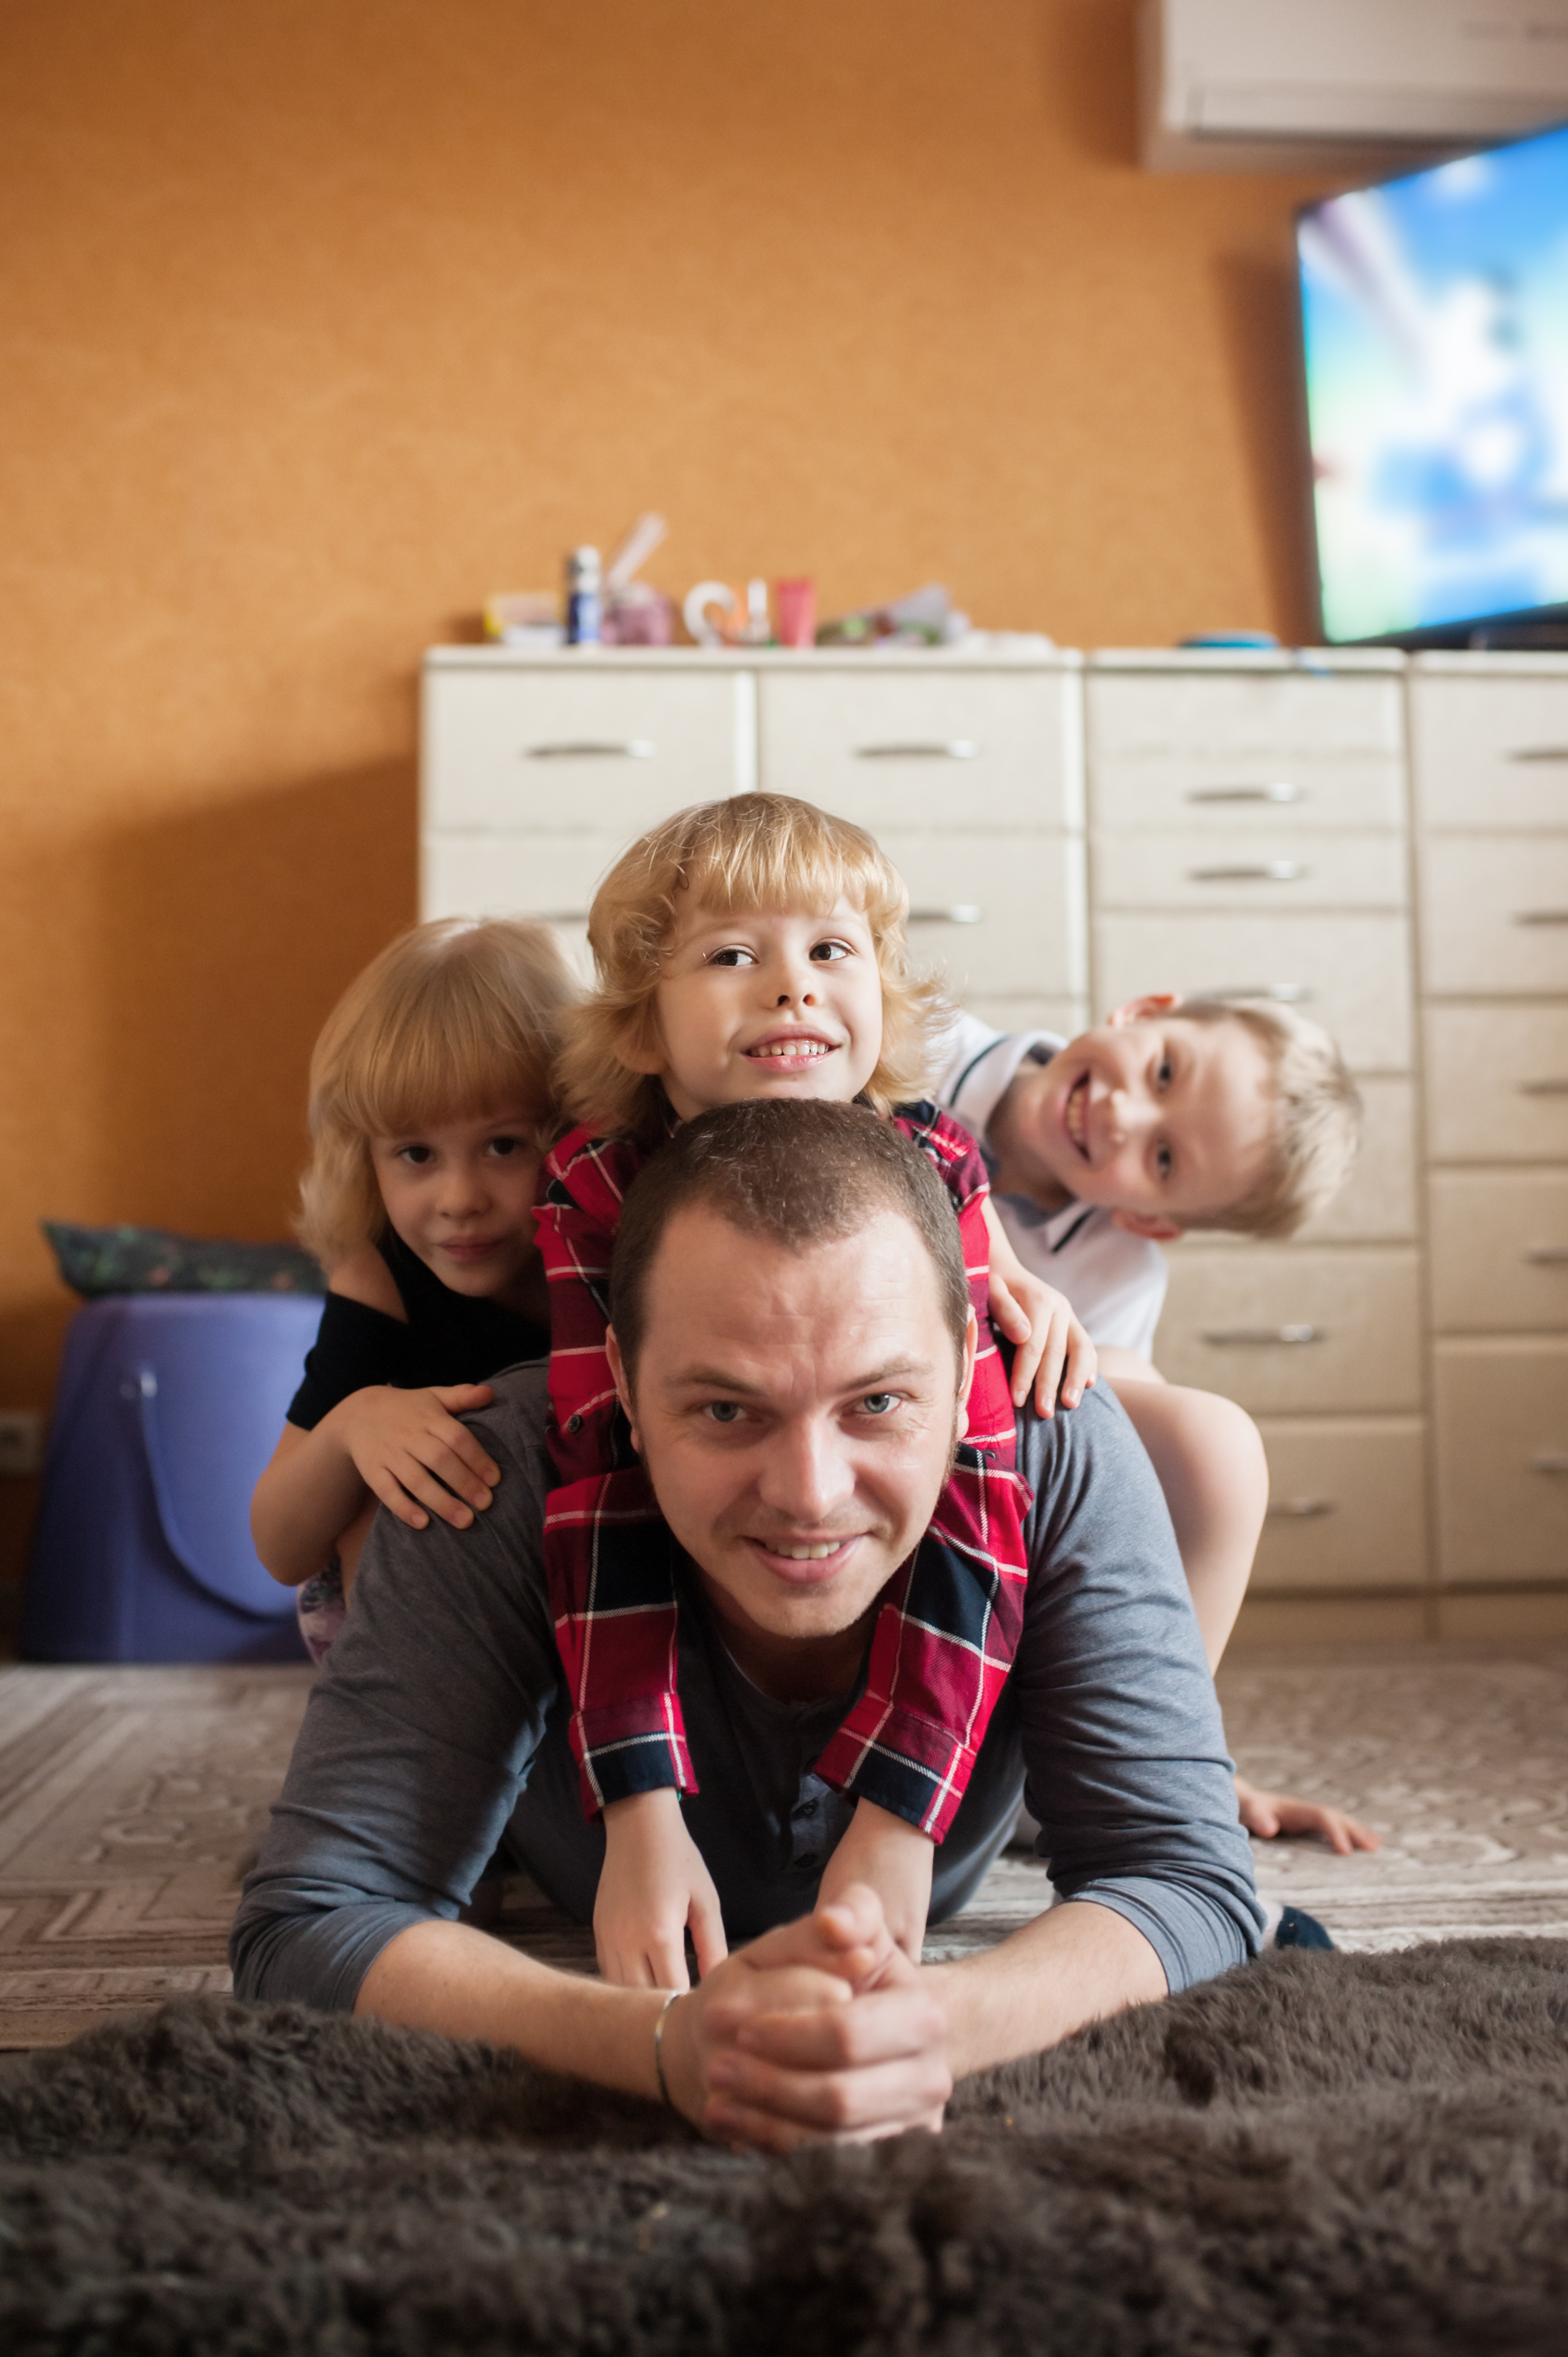 A father lying on the floor with his children riding on his back | Source: Shutterstock